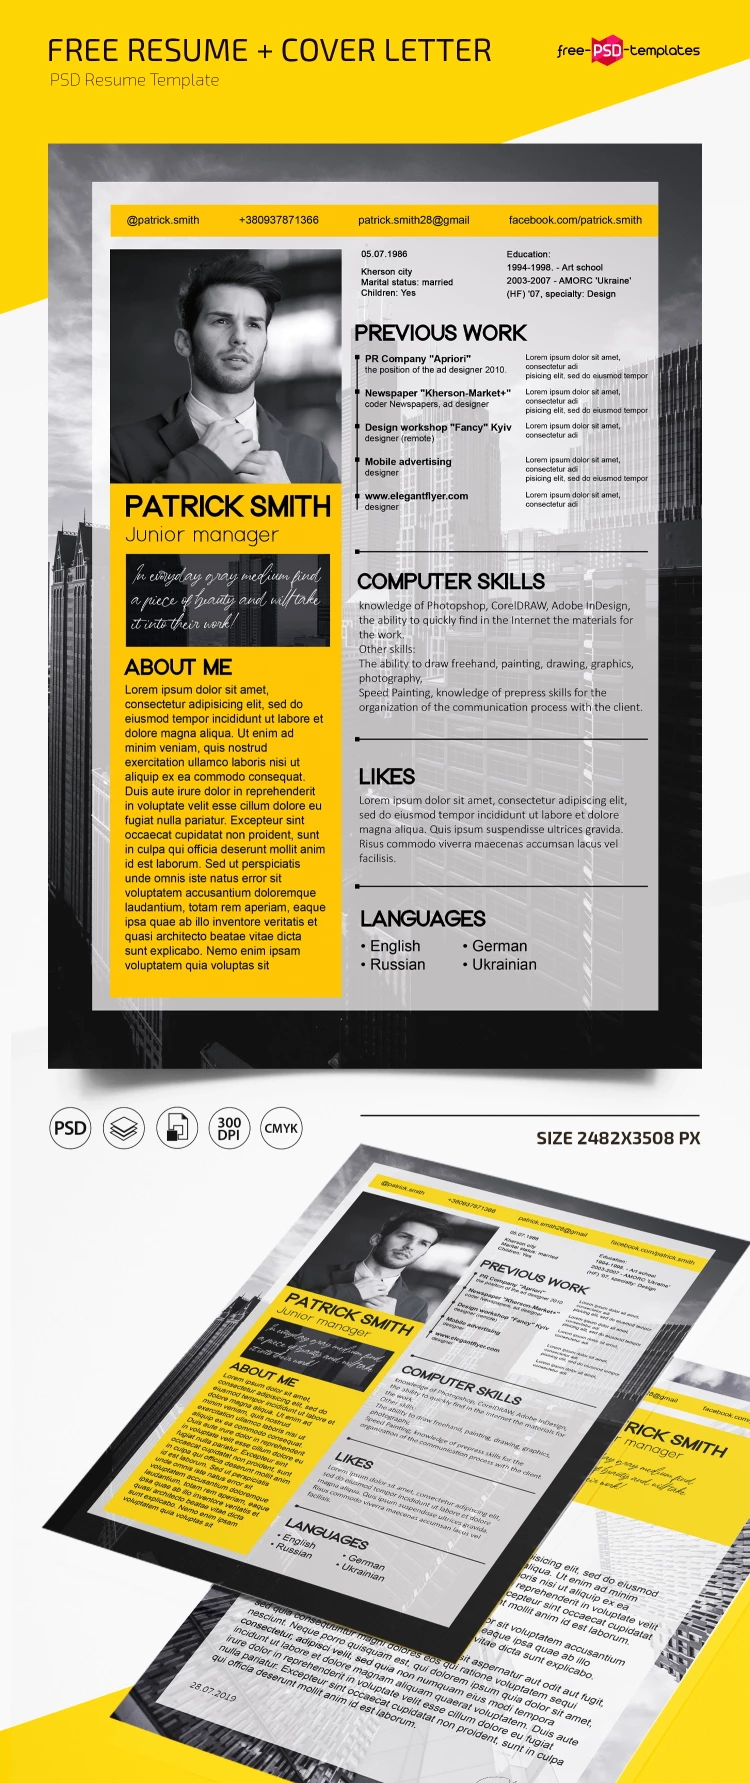 Free Resume and Cover Letter PSD Template